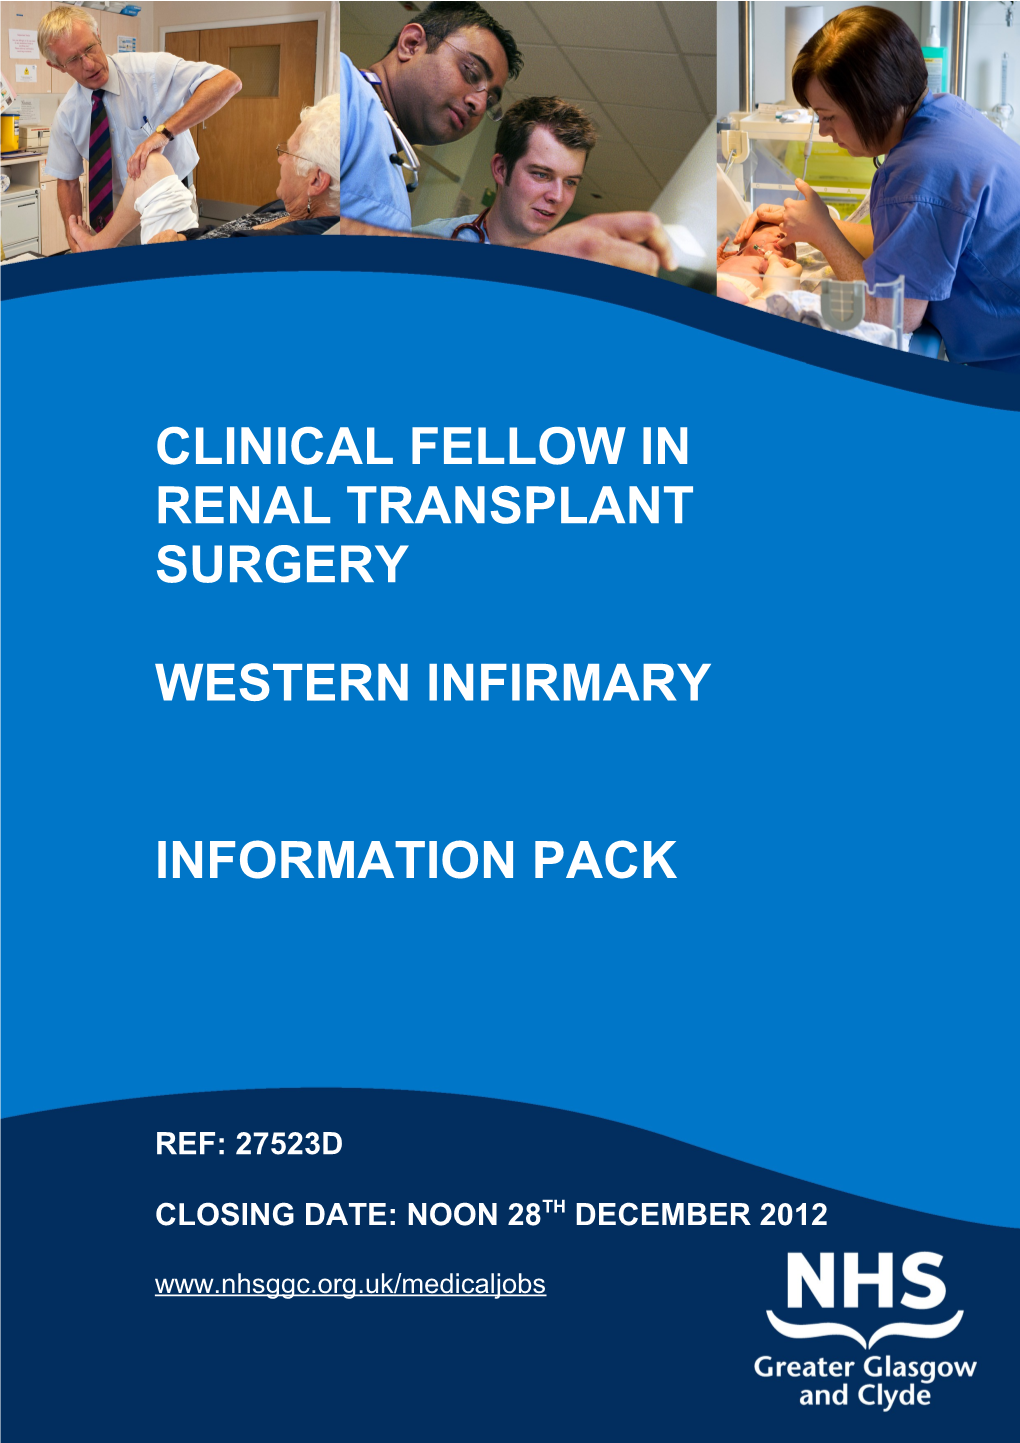 Clinical Fellow in Renal Transplant Surgery